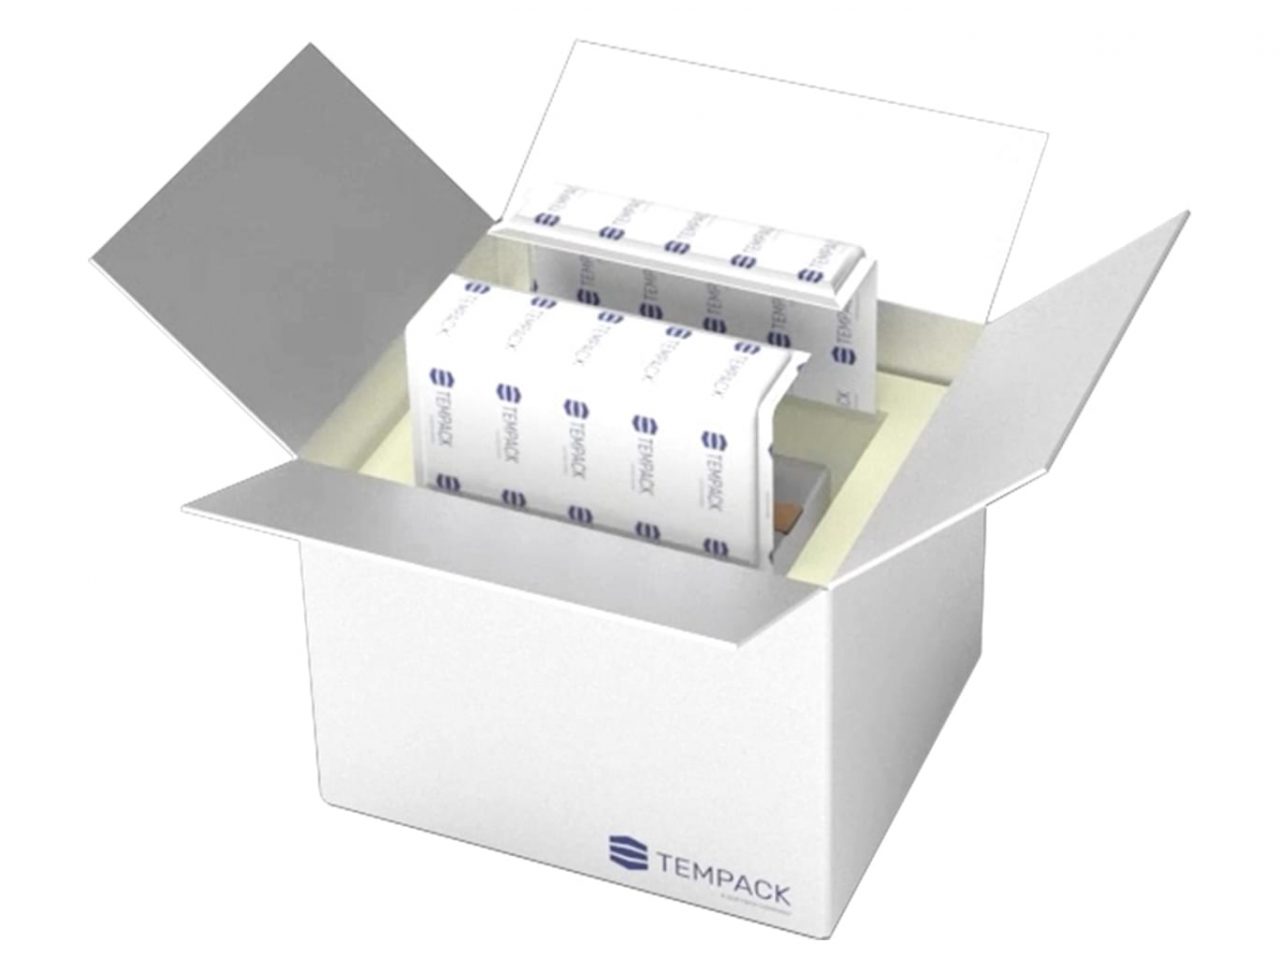 tempack-prequalified-solutions-biotech-72-4@2x-1280x958